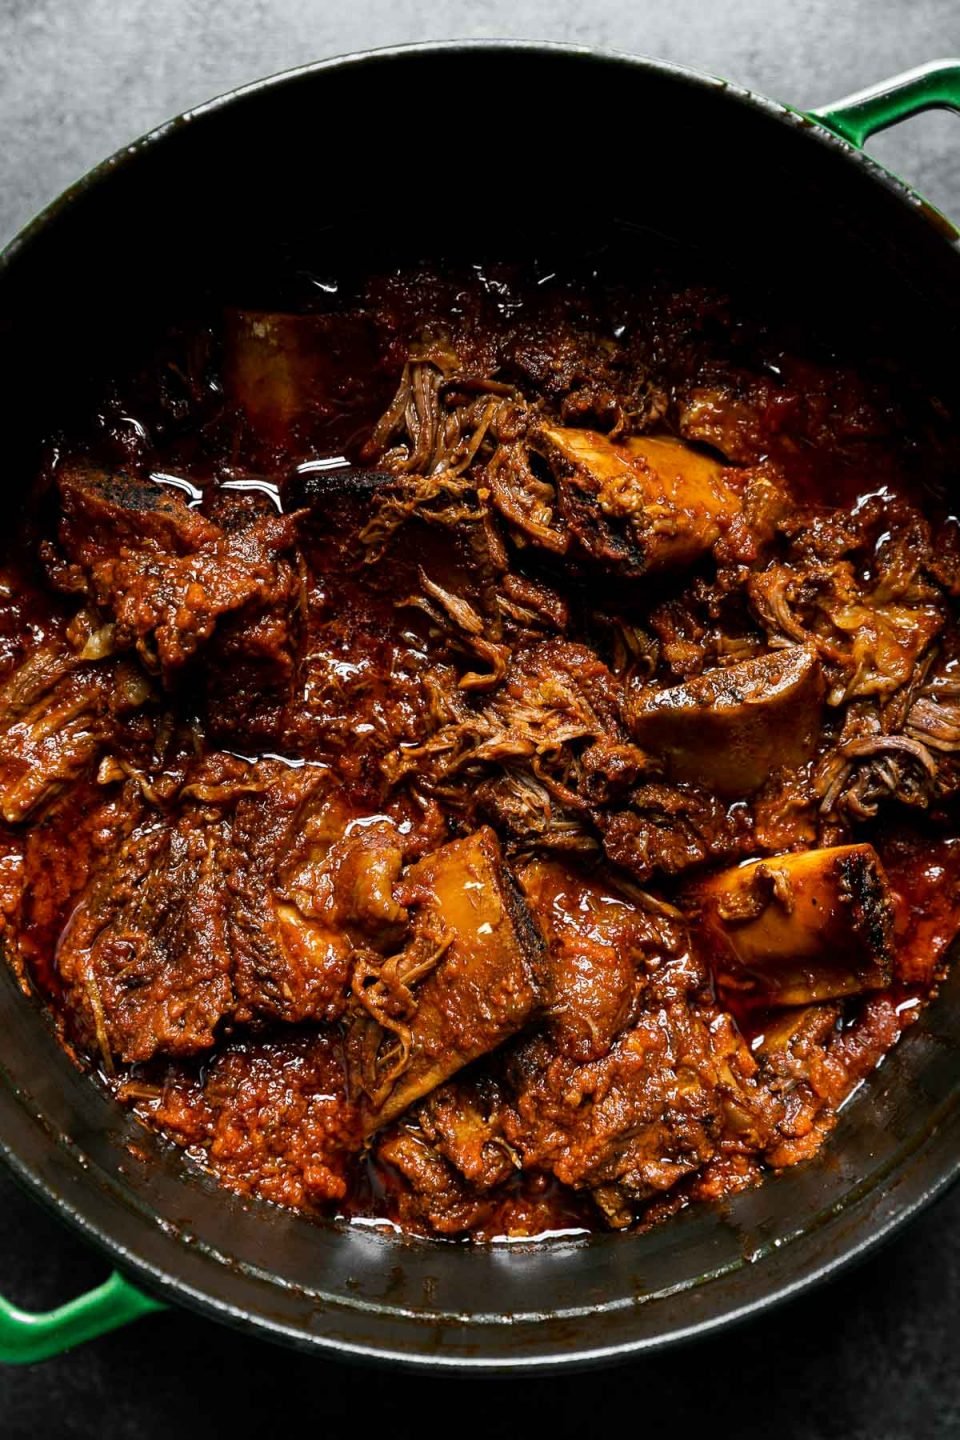 Slowly braised beef short rib ragu in a large Dutch oven atop a dark textured surface.